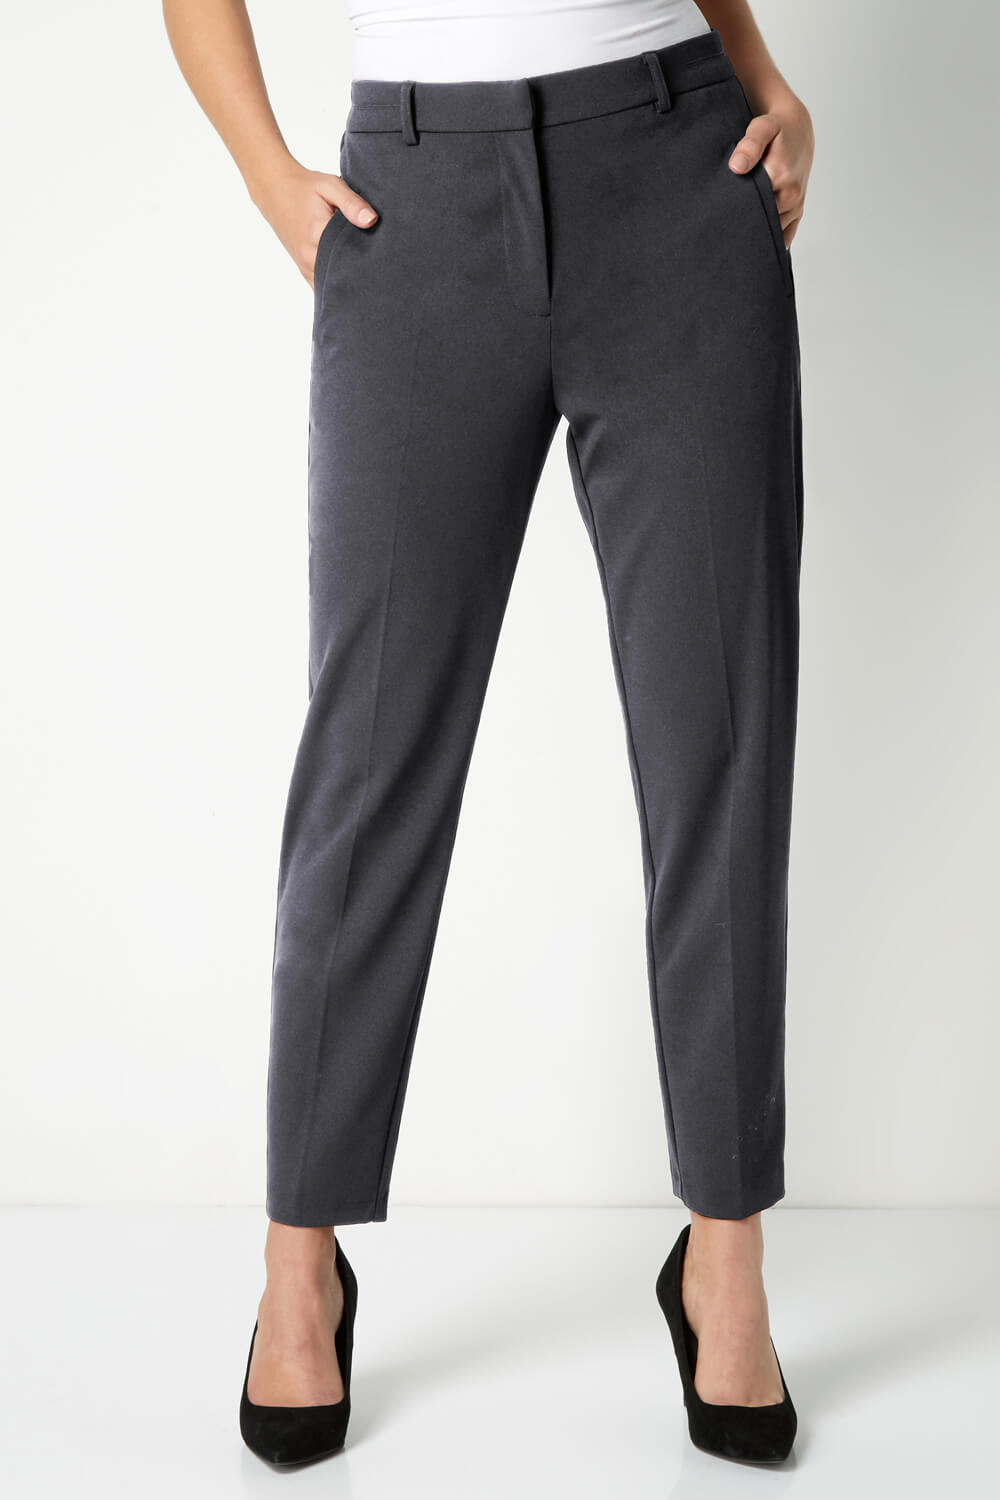 Ladies Grey Trousers | Grey Trousers for Women | hush